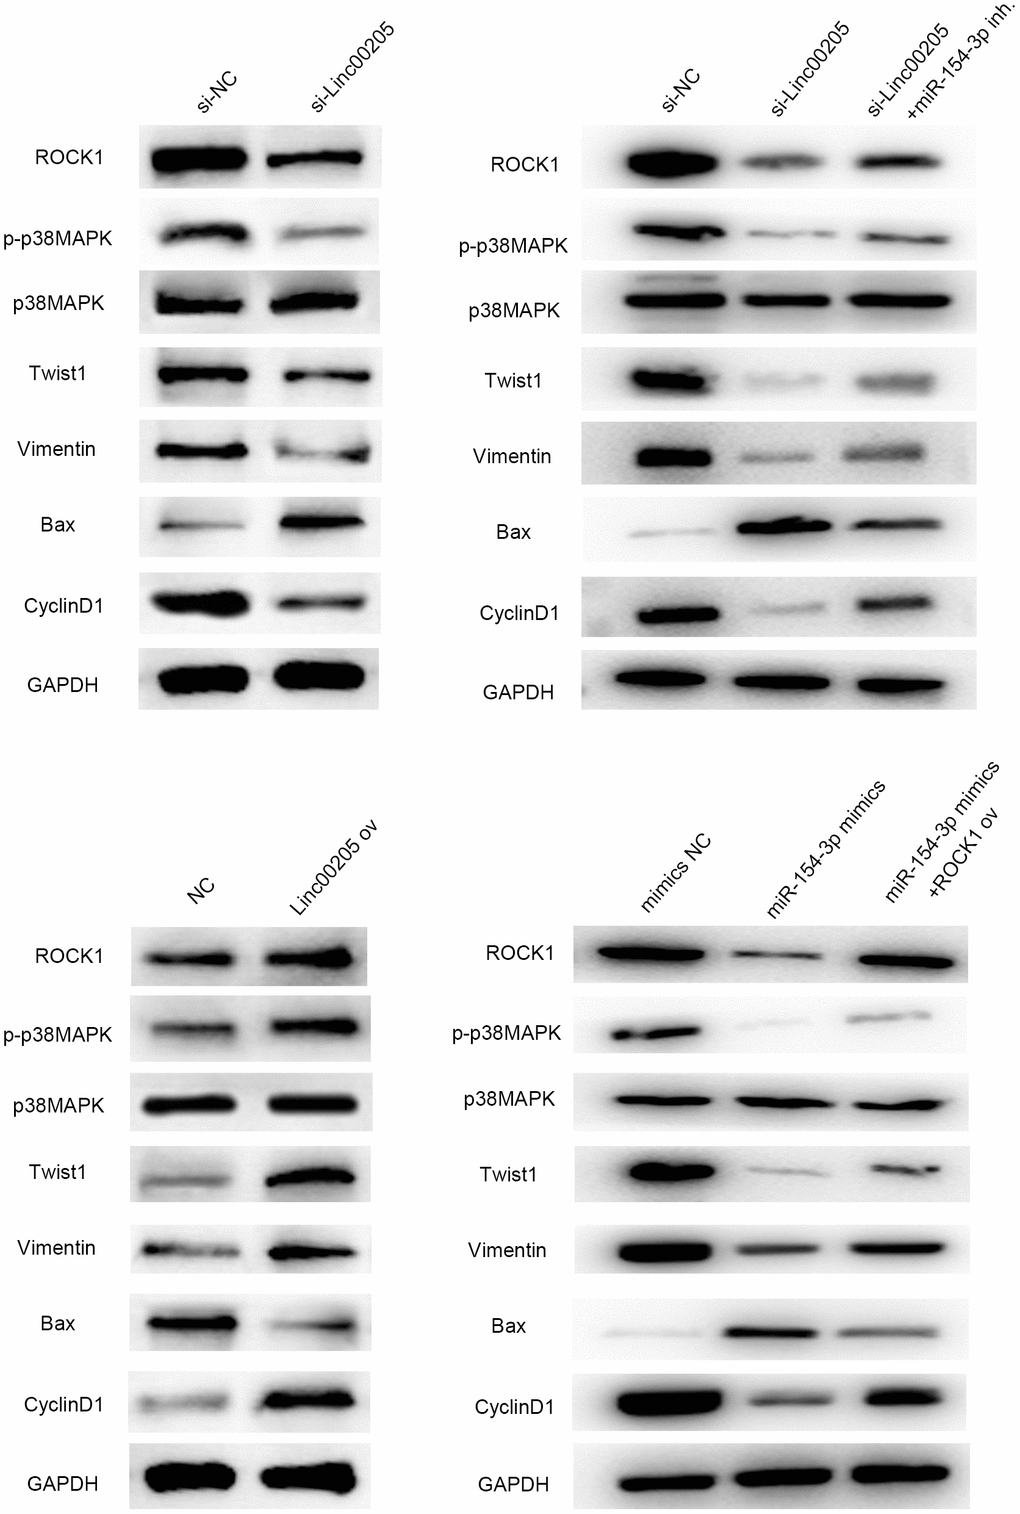 Linc00205 affects the p38 MAPK signaling pathway by interacting with ROCK1, and further affects EMT pathway-related protein (vimentin), apoptosis pathway protein (Bax) and proliferation pathway protein (cyclinD1) and the effects are regulated by miR-154-3p and ROCK1. Western blot assays for ROCK1, p-p38MAPK, p38MAPK, Twist, Vimentin, Bax and CyclinD1 protein expression in HepG2 cells transfected in different groups.